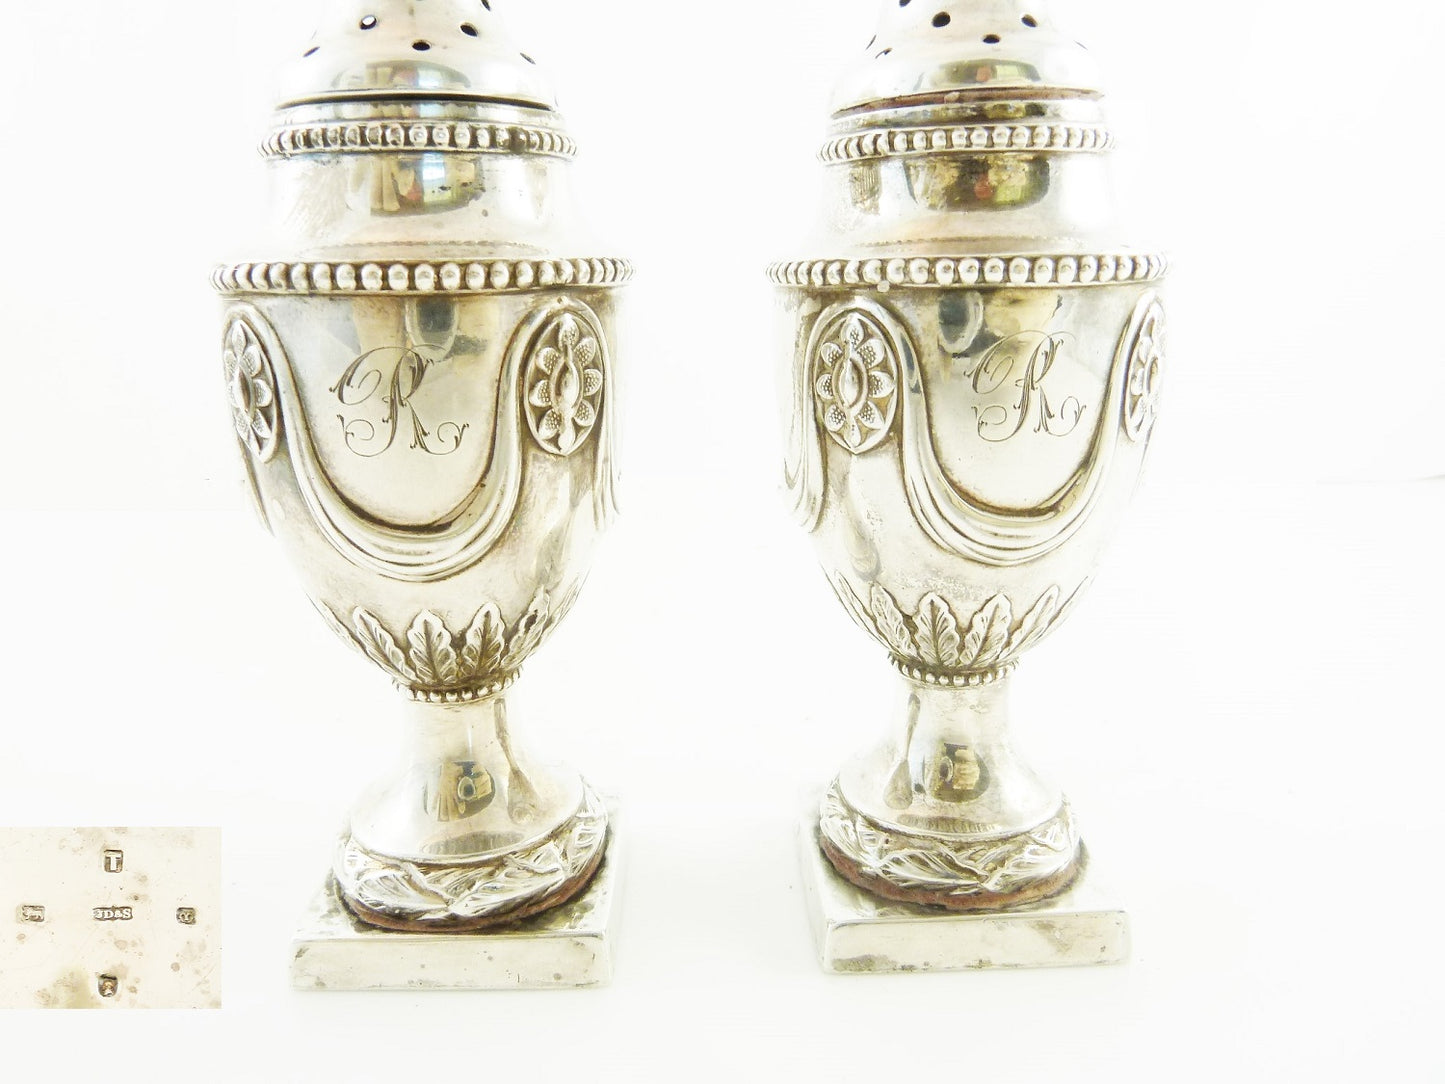 Antique Sterling Silver English Pepperettes, Castor or Shakers, A Pair - 43 Chesapeake Court Antiques